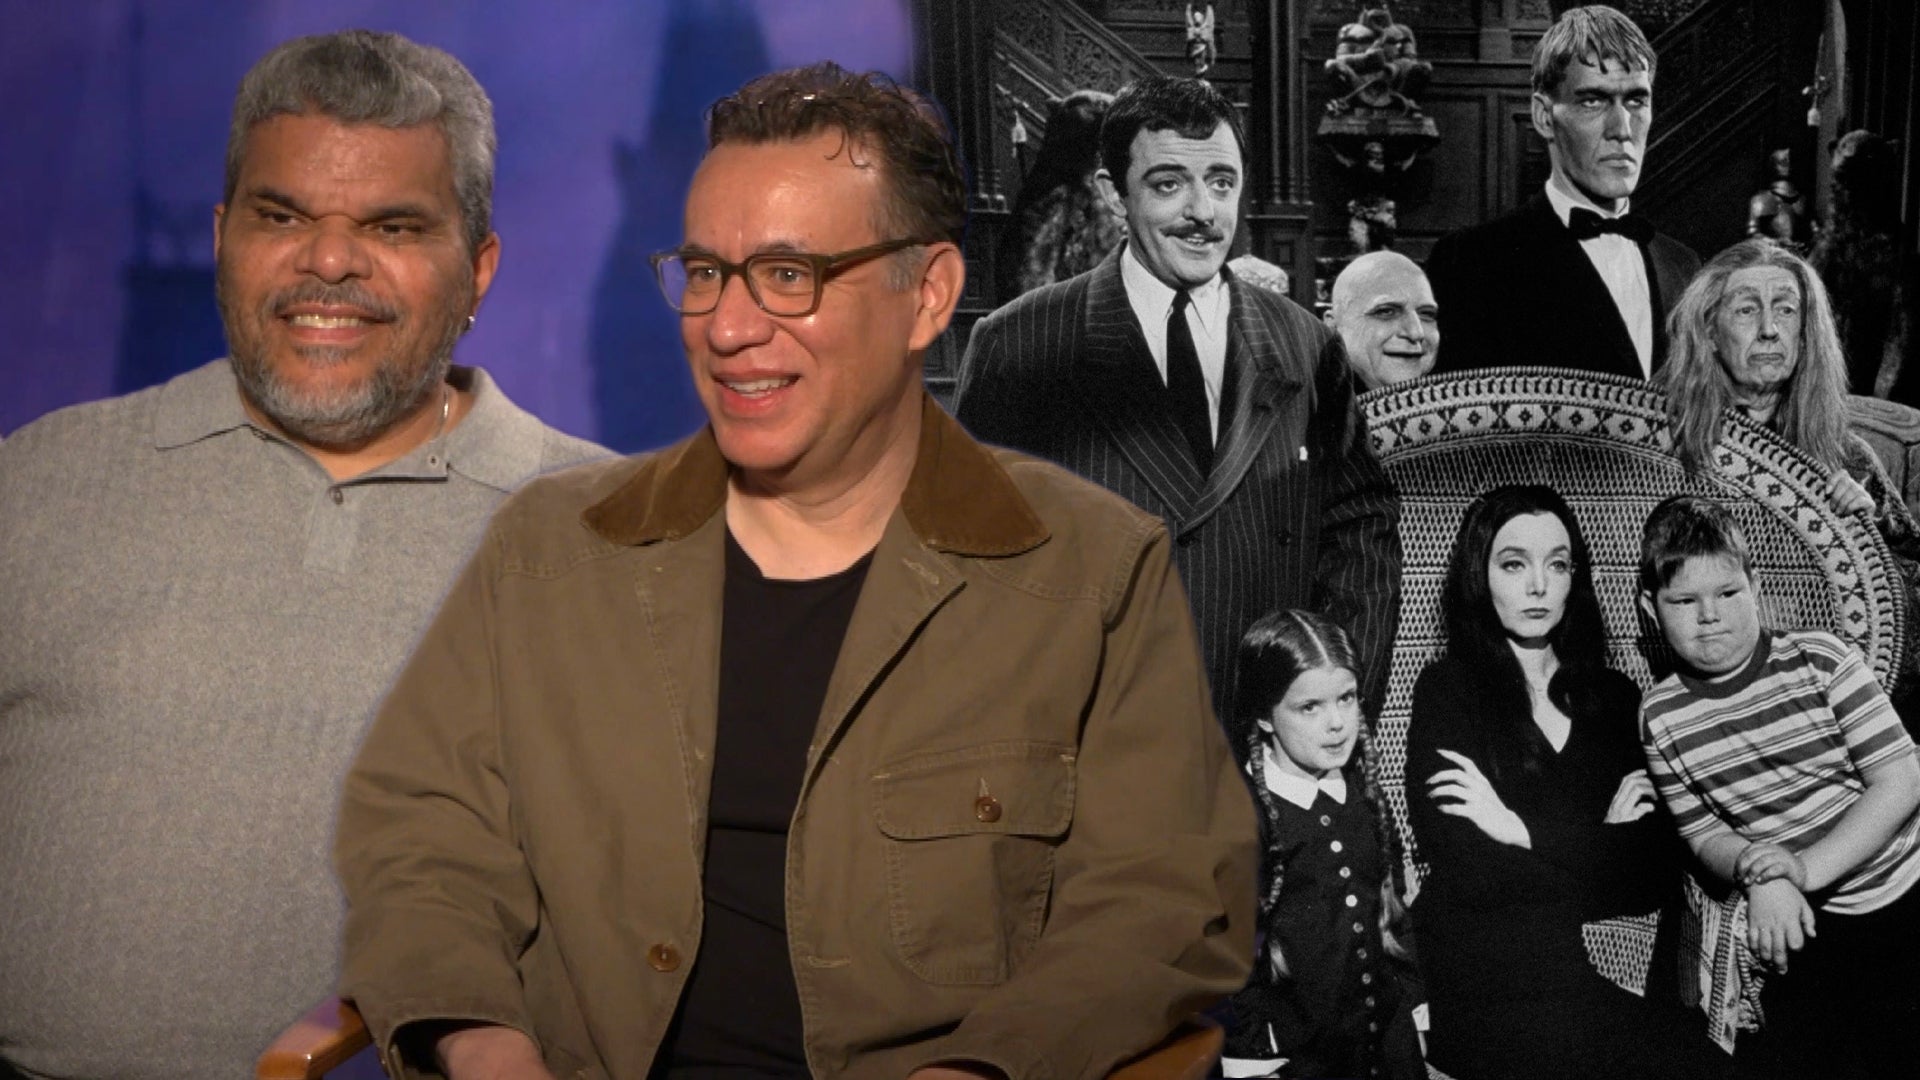 Wednesday: Fred Armisen cast as Uncle Fester in Addams Family spin-off